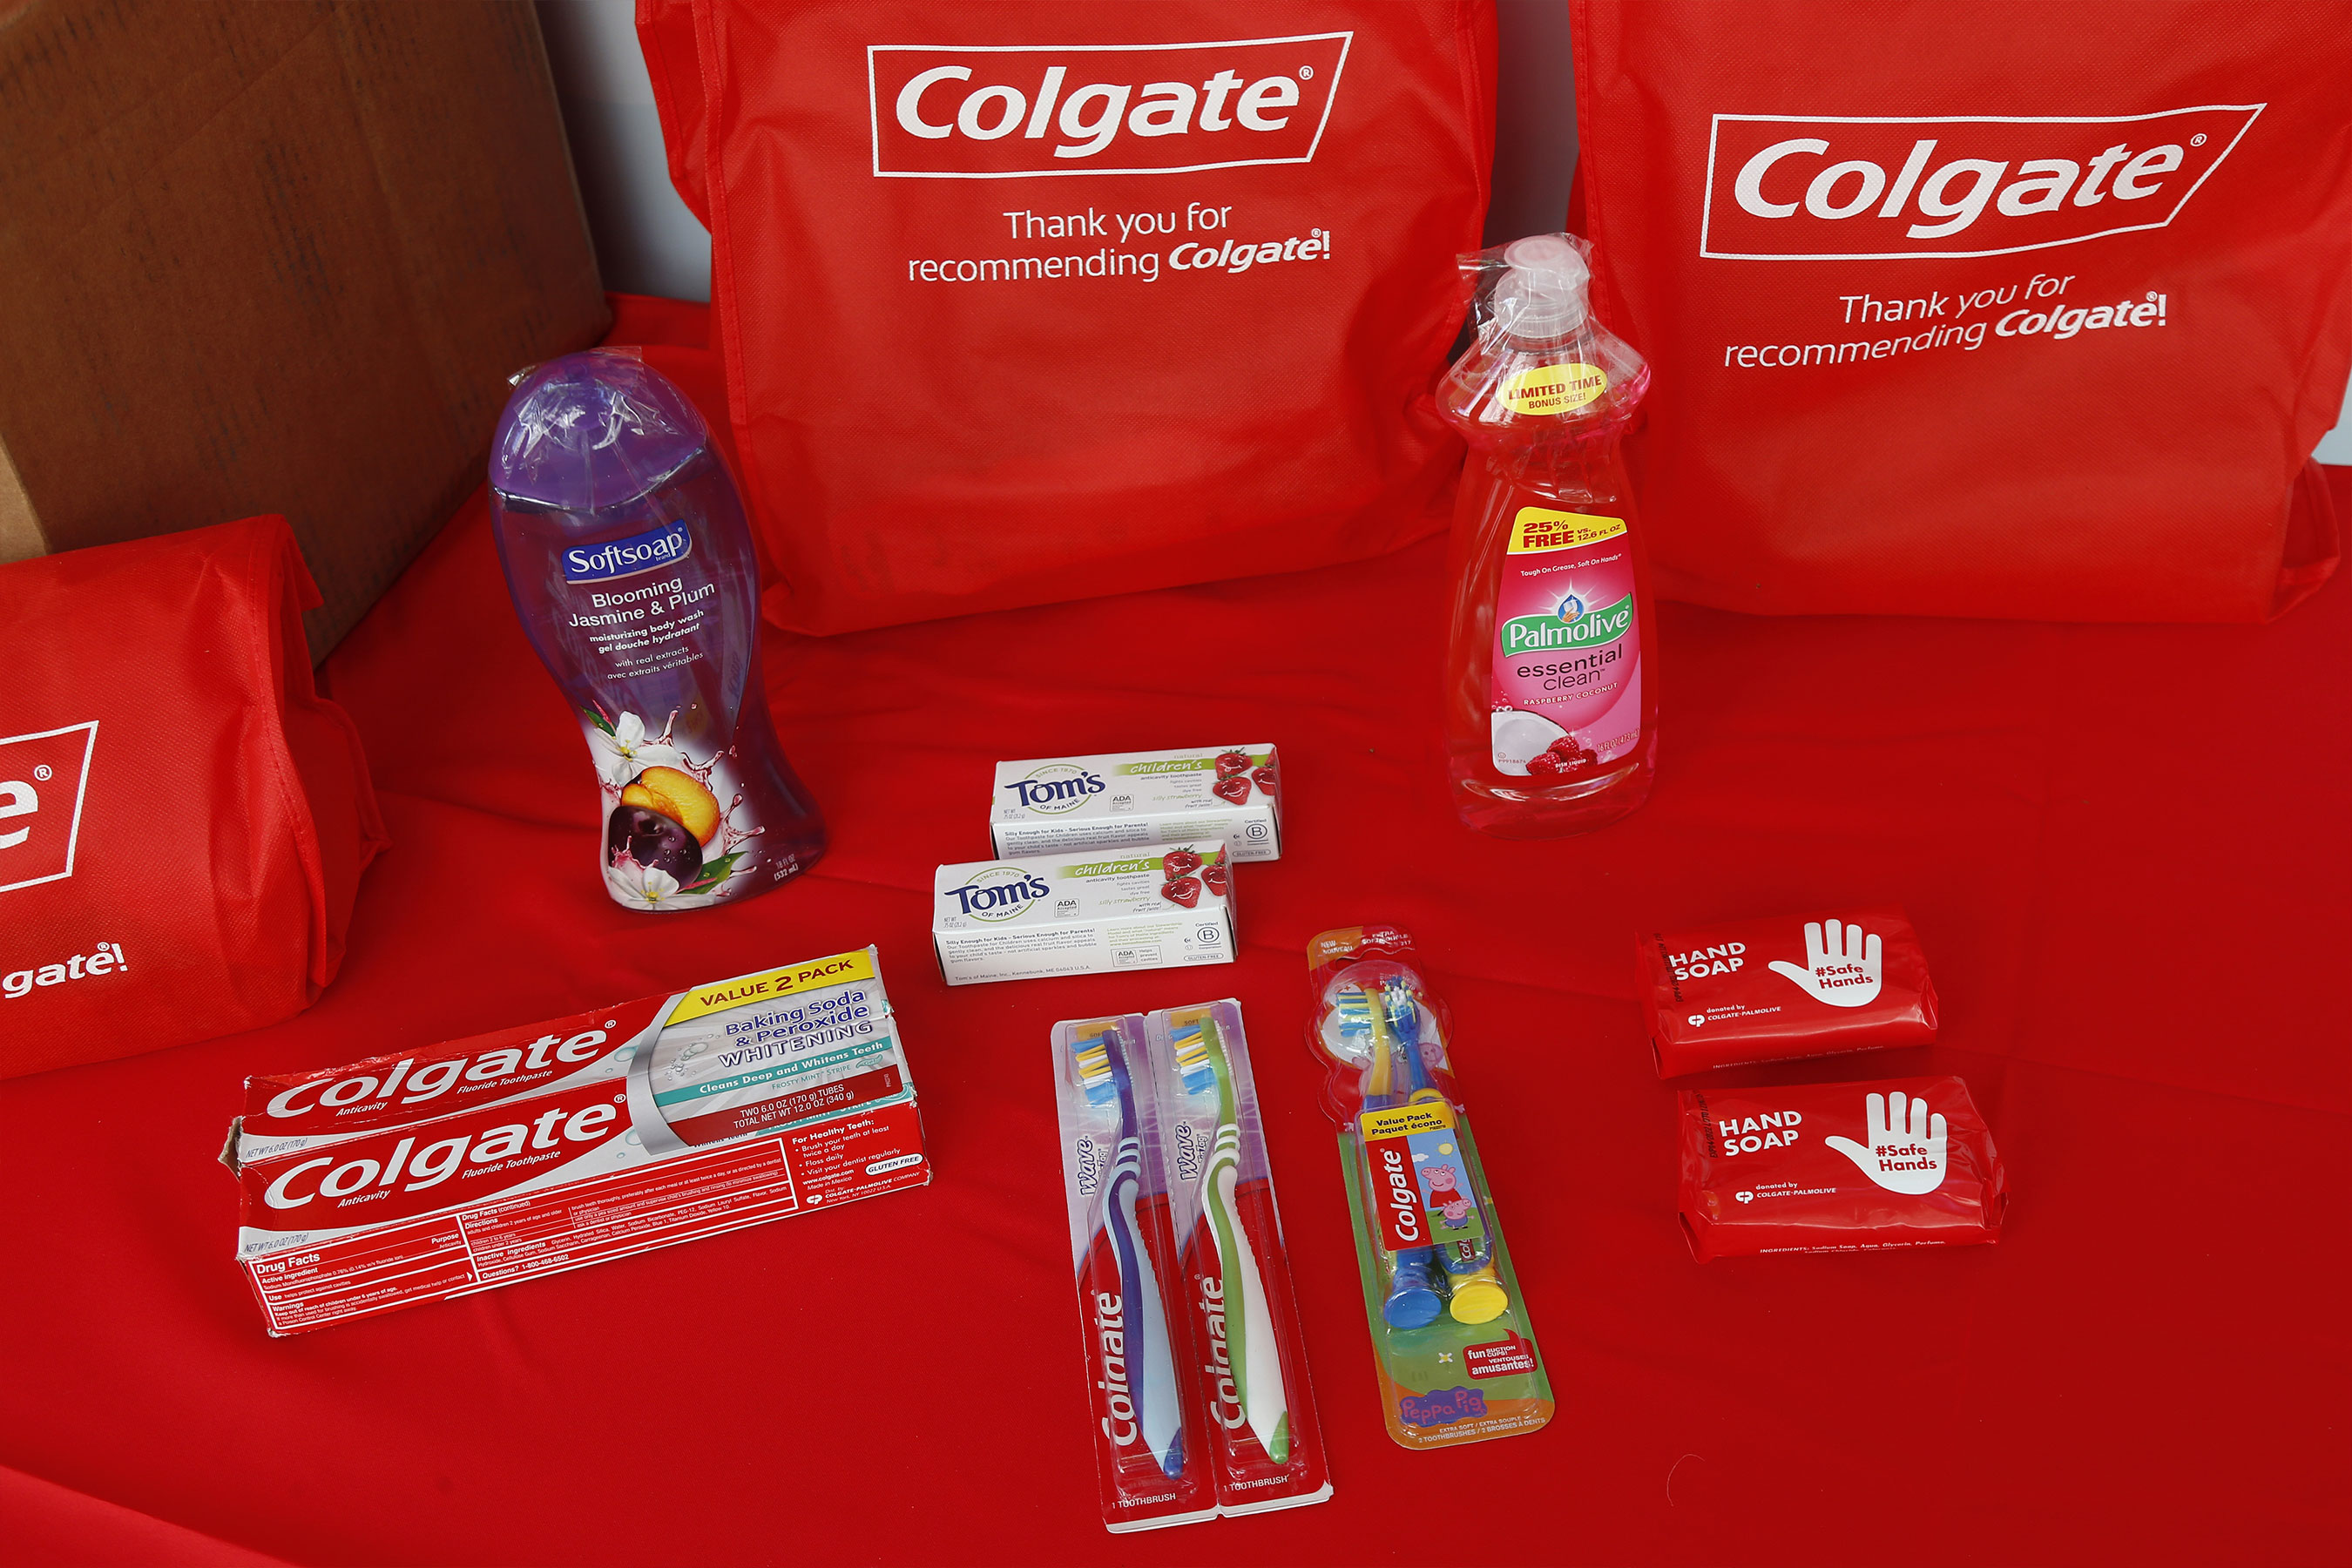 Colgate Bright Smiles, Bright Futures program delivers health and wellness kits to local communities across the U.S.